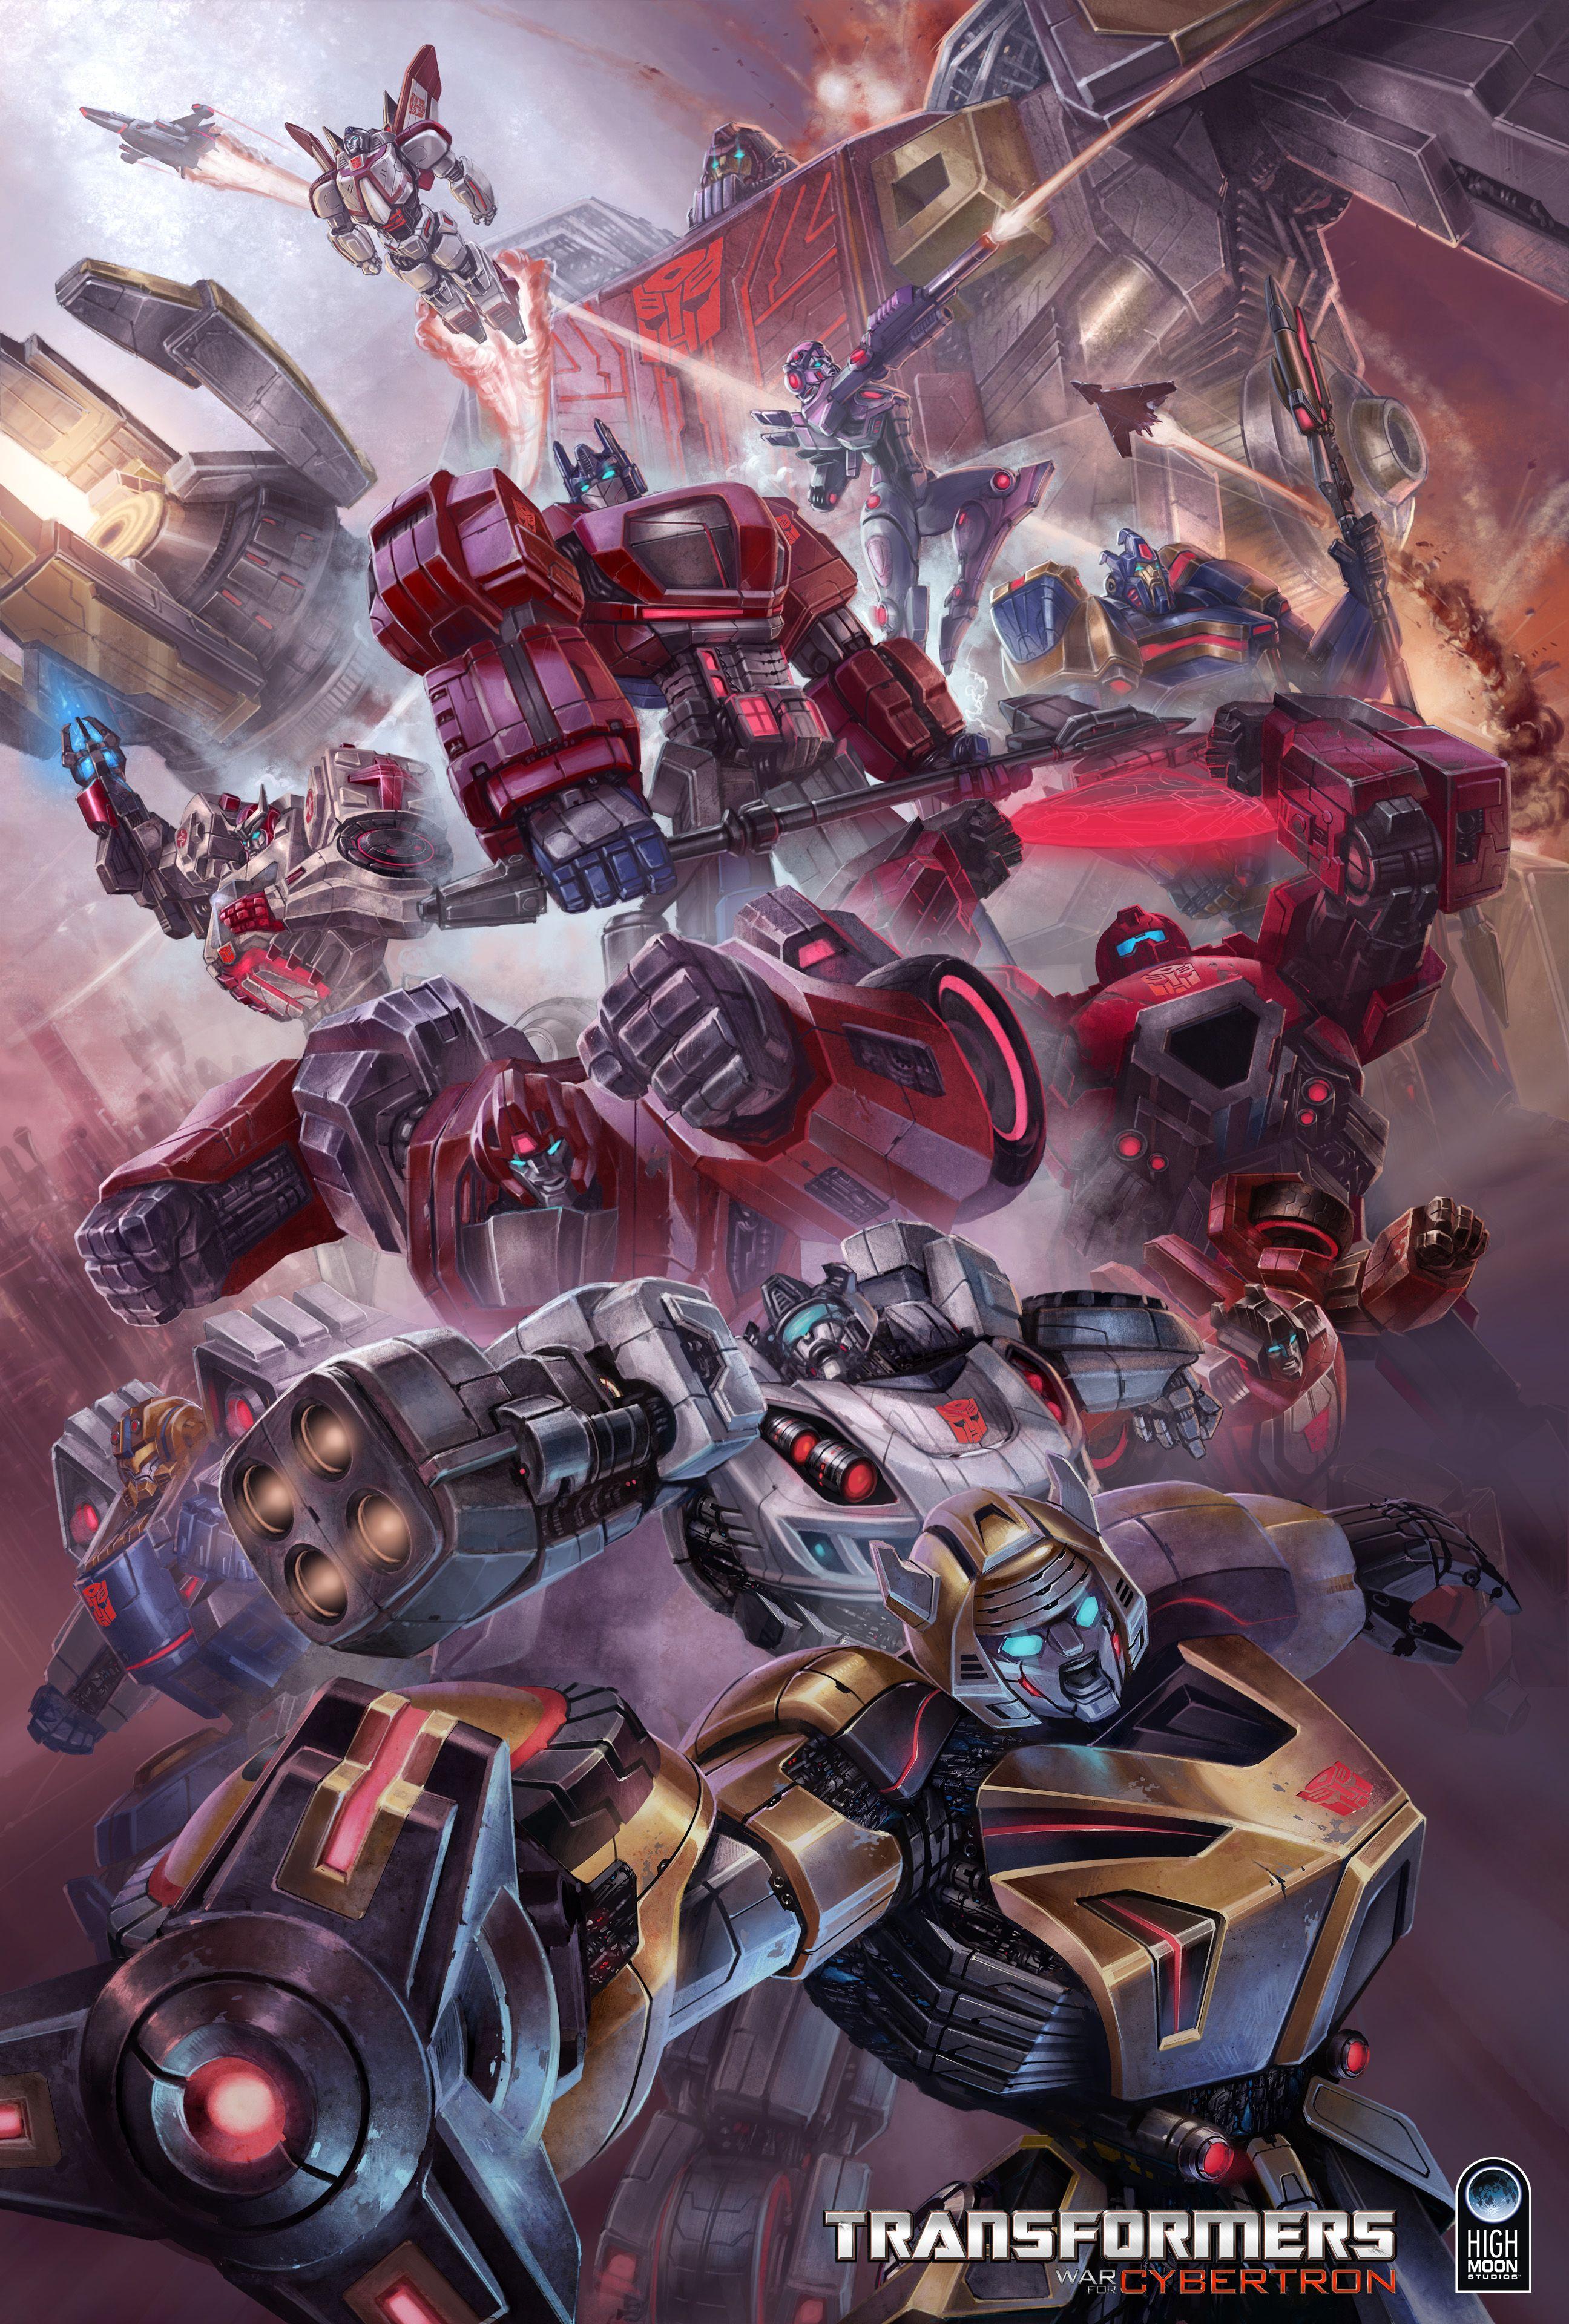 war for cybertron game download